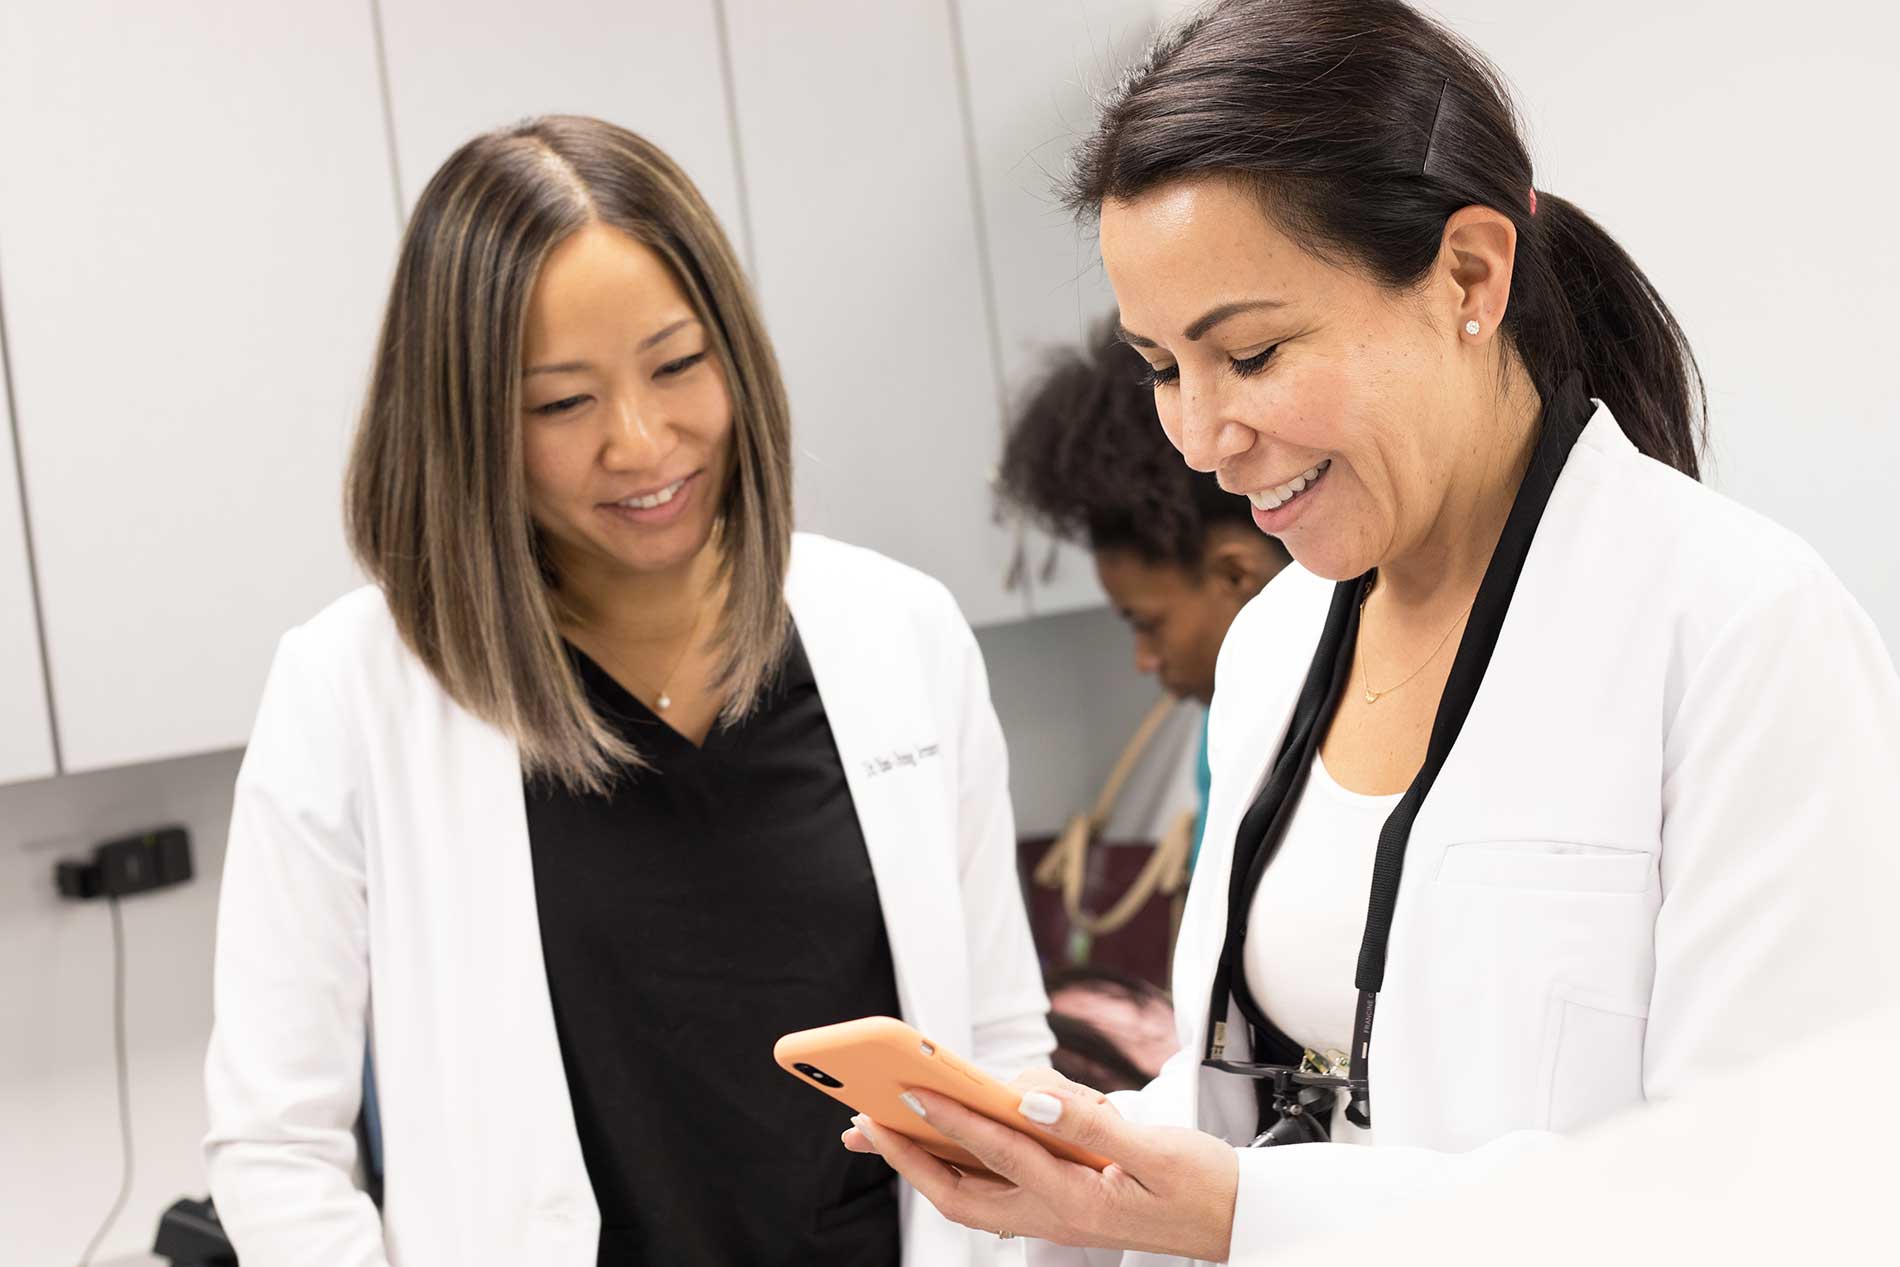 Dr. Estrada and a team member look at a smart phone together, both smiling.